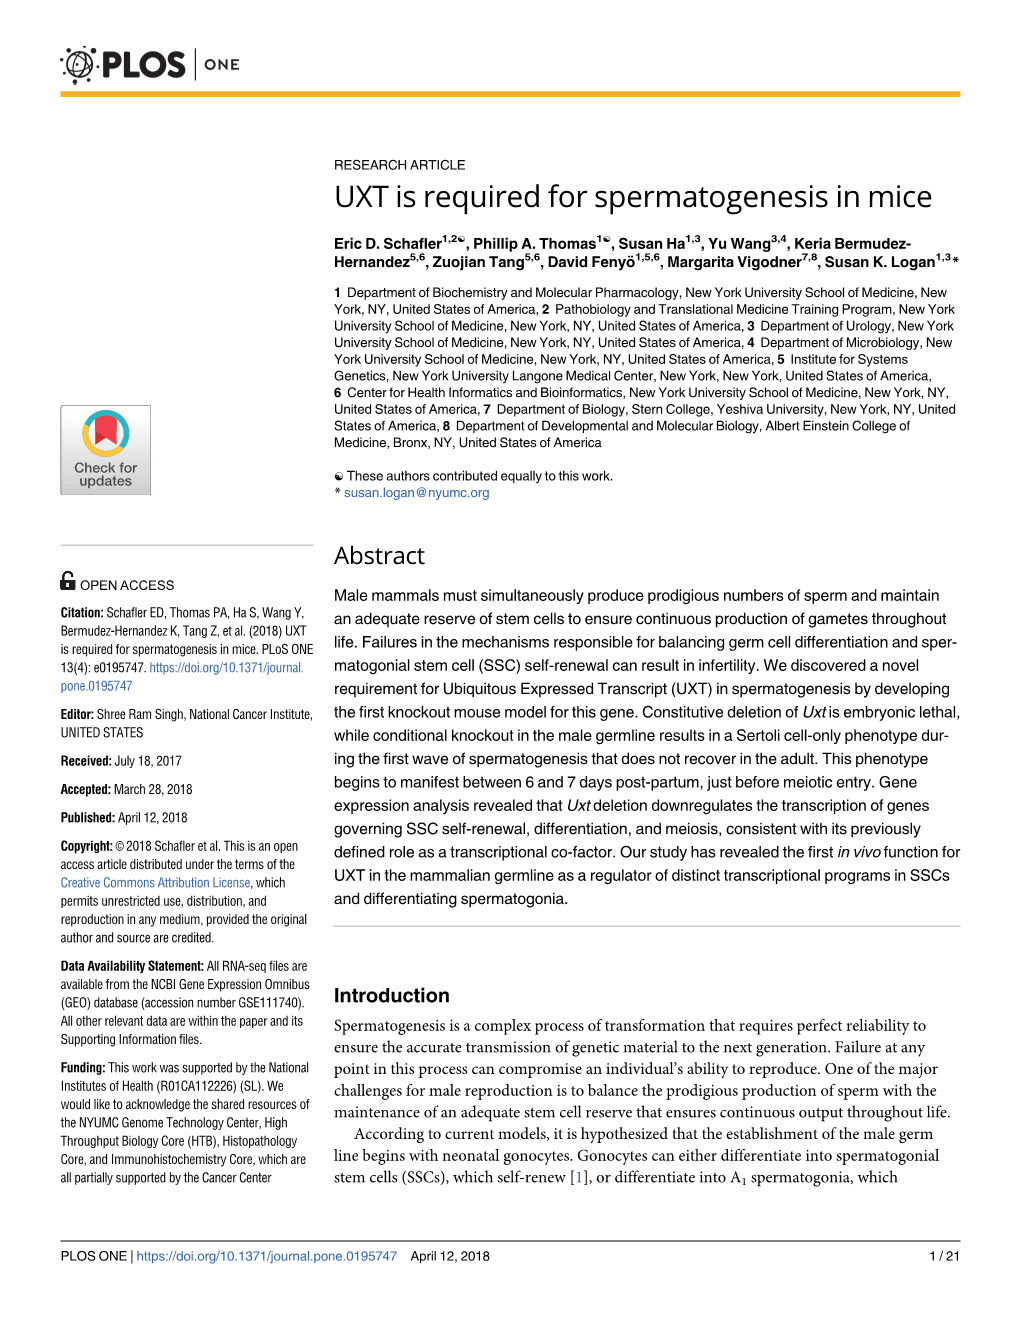 UXT Is Required for Spermatogenesis in Mice